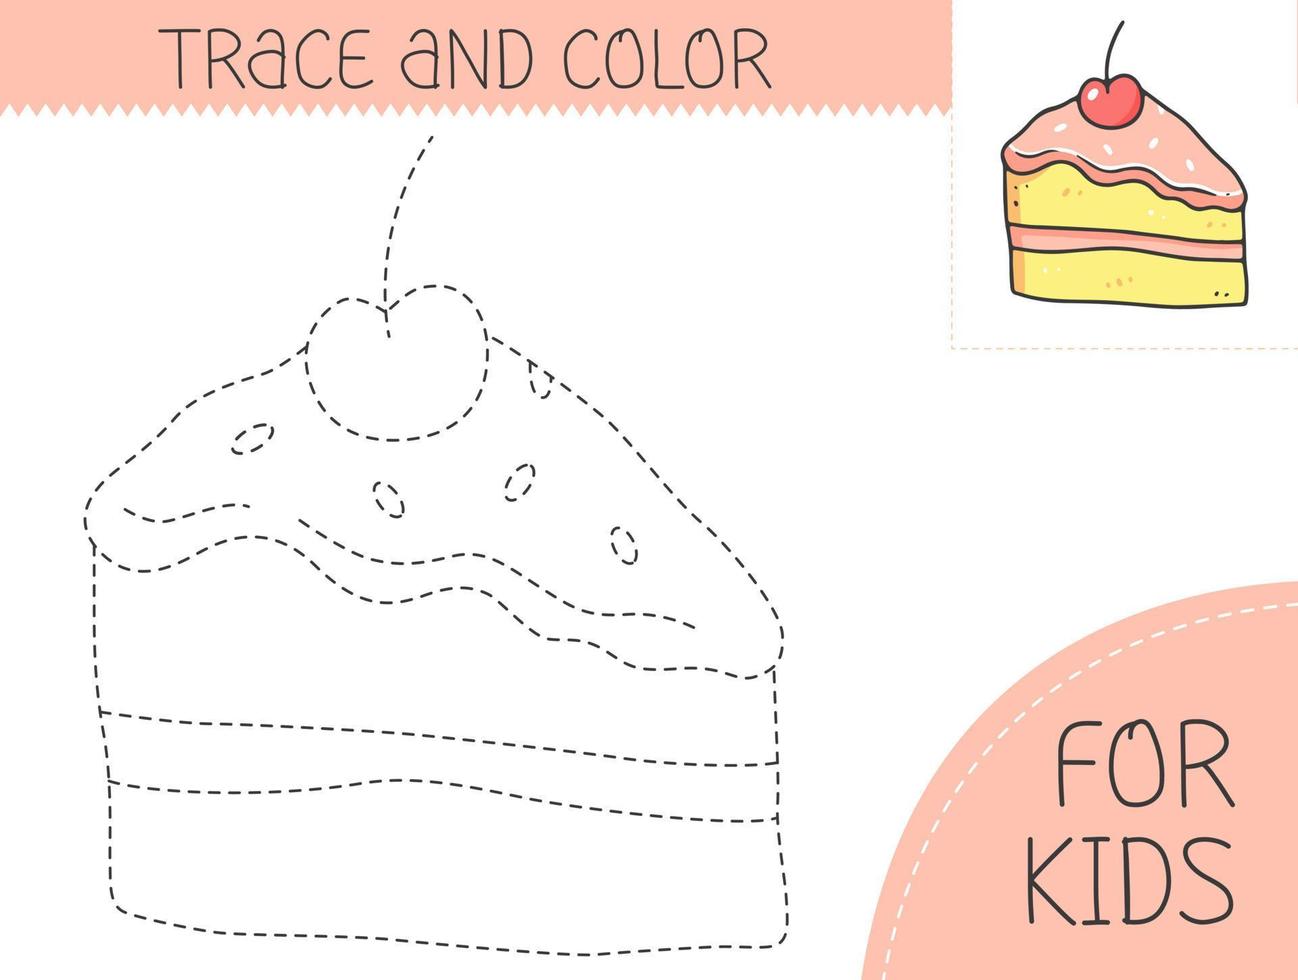 Trace and color coloring book with piece of cake for kids. Coloring page with cartoon cake. Vector illustration for kids.